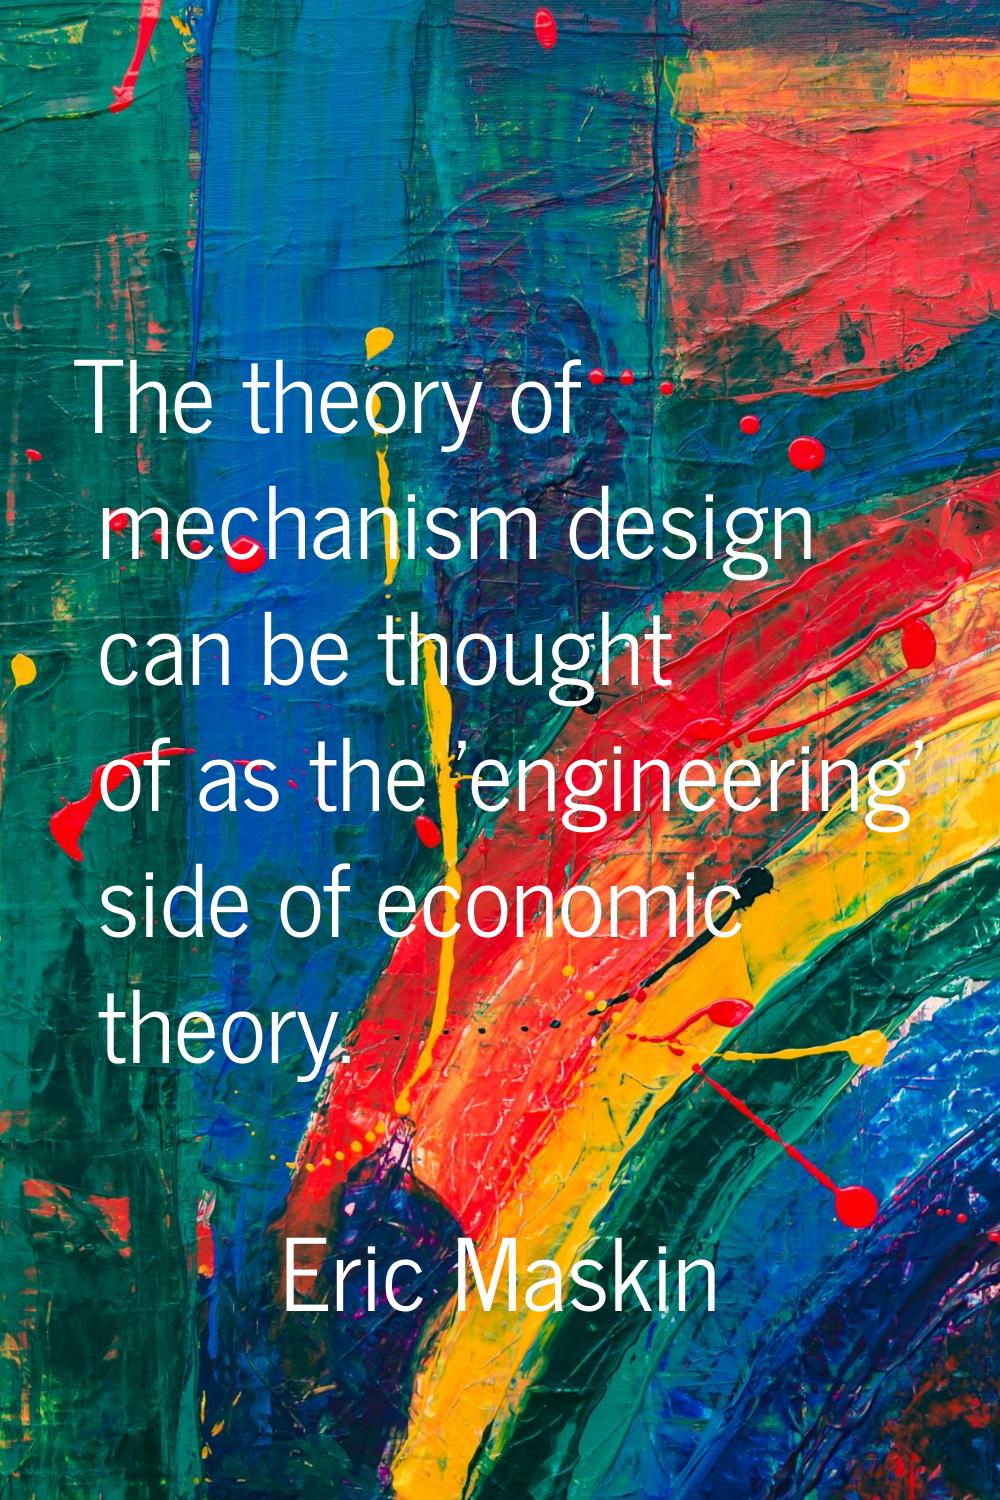 The theory of mechanism design can be thought of as the 'engineering' side of economic theory.